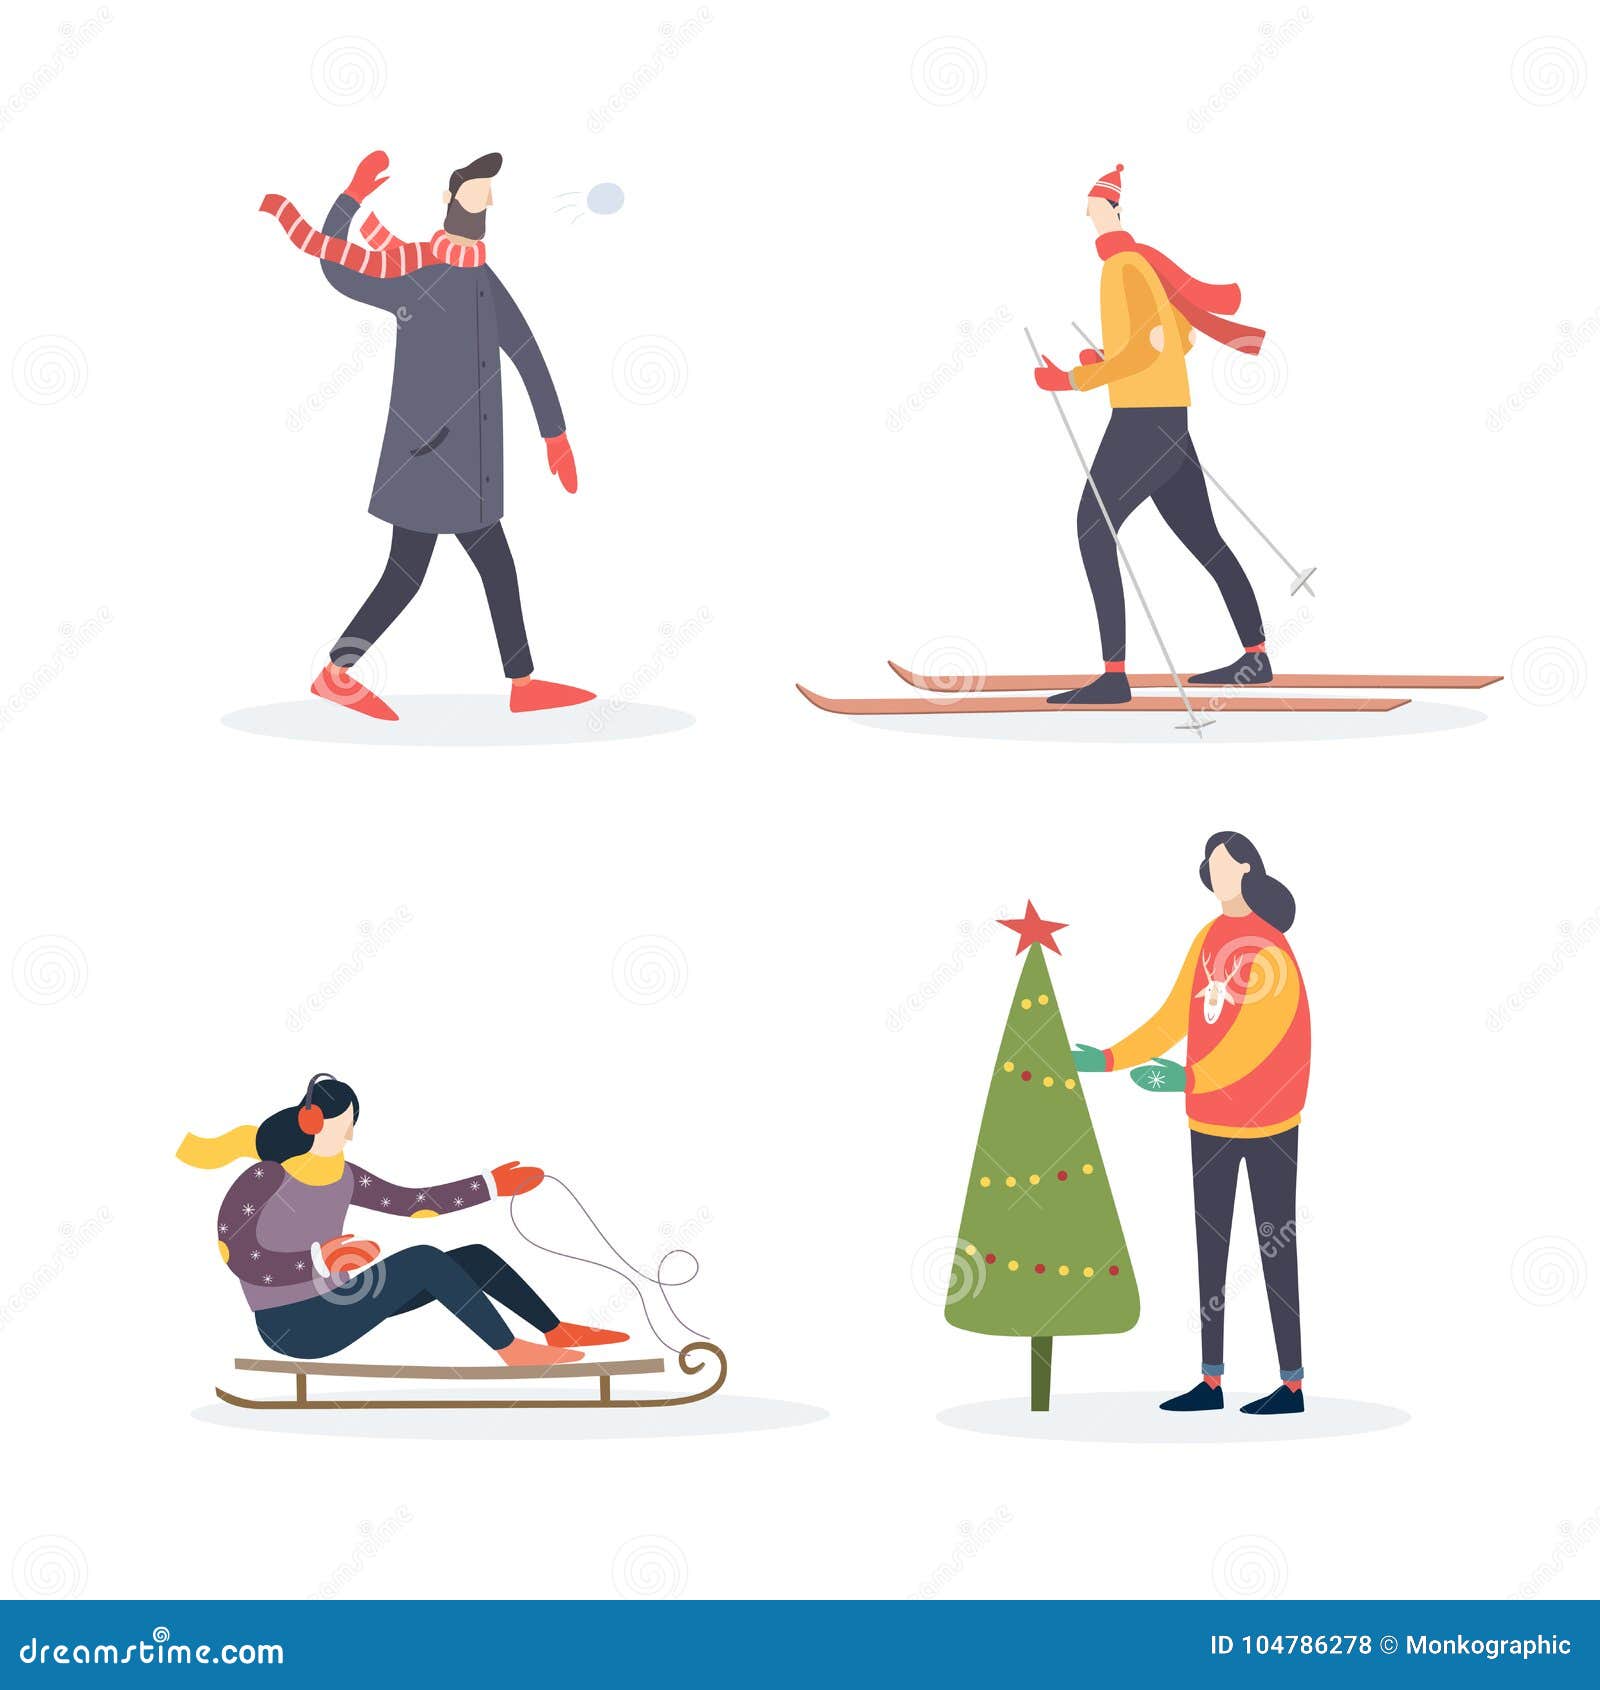 winter  peoples: man in scarf plays snowballs, skier, girl on sledding, woman decorates christmas tree.